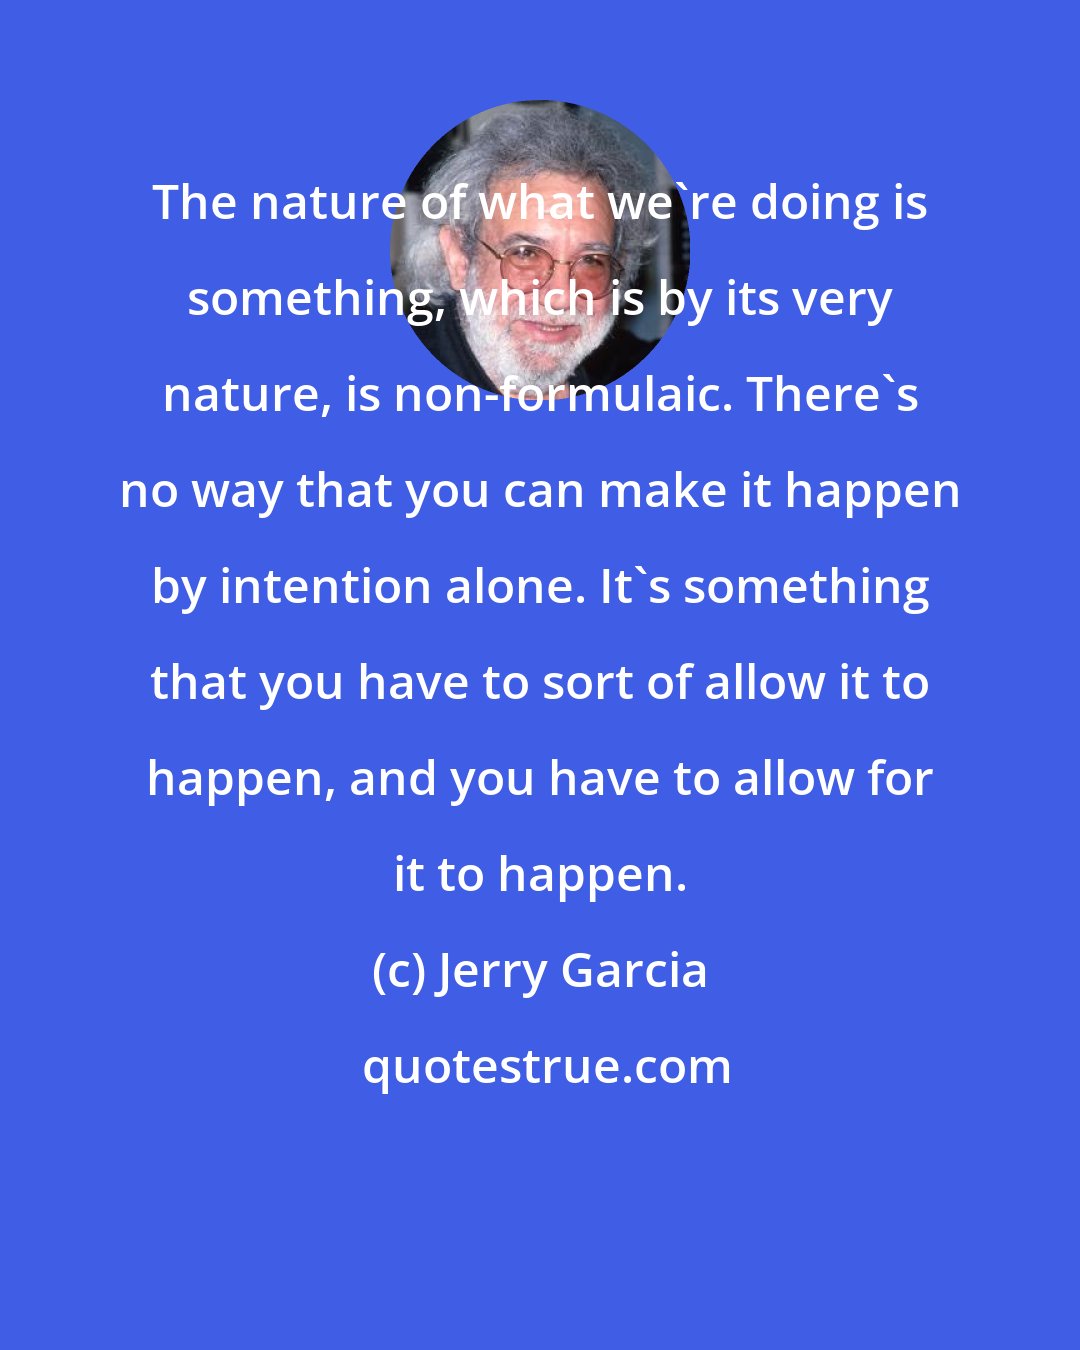 Jerry Garcia: The nature of what we're doing is something, which is by its very nature, is non-formulaic. There's no way that you can make it happen by intention alone. It's something that you have to sort of allow it to happen, and you have to allow for it to happen.